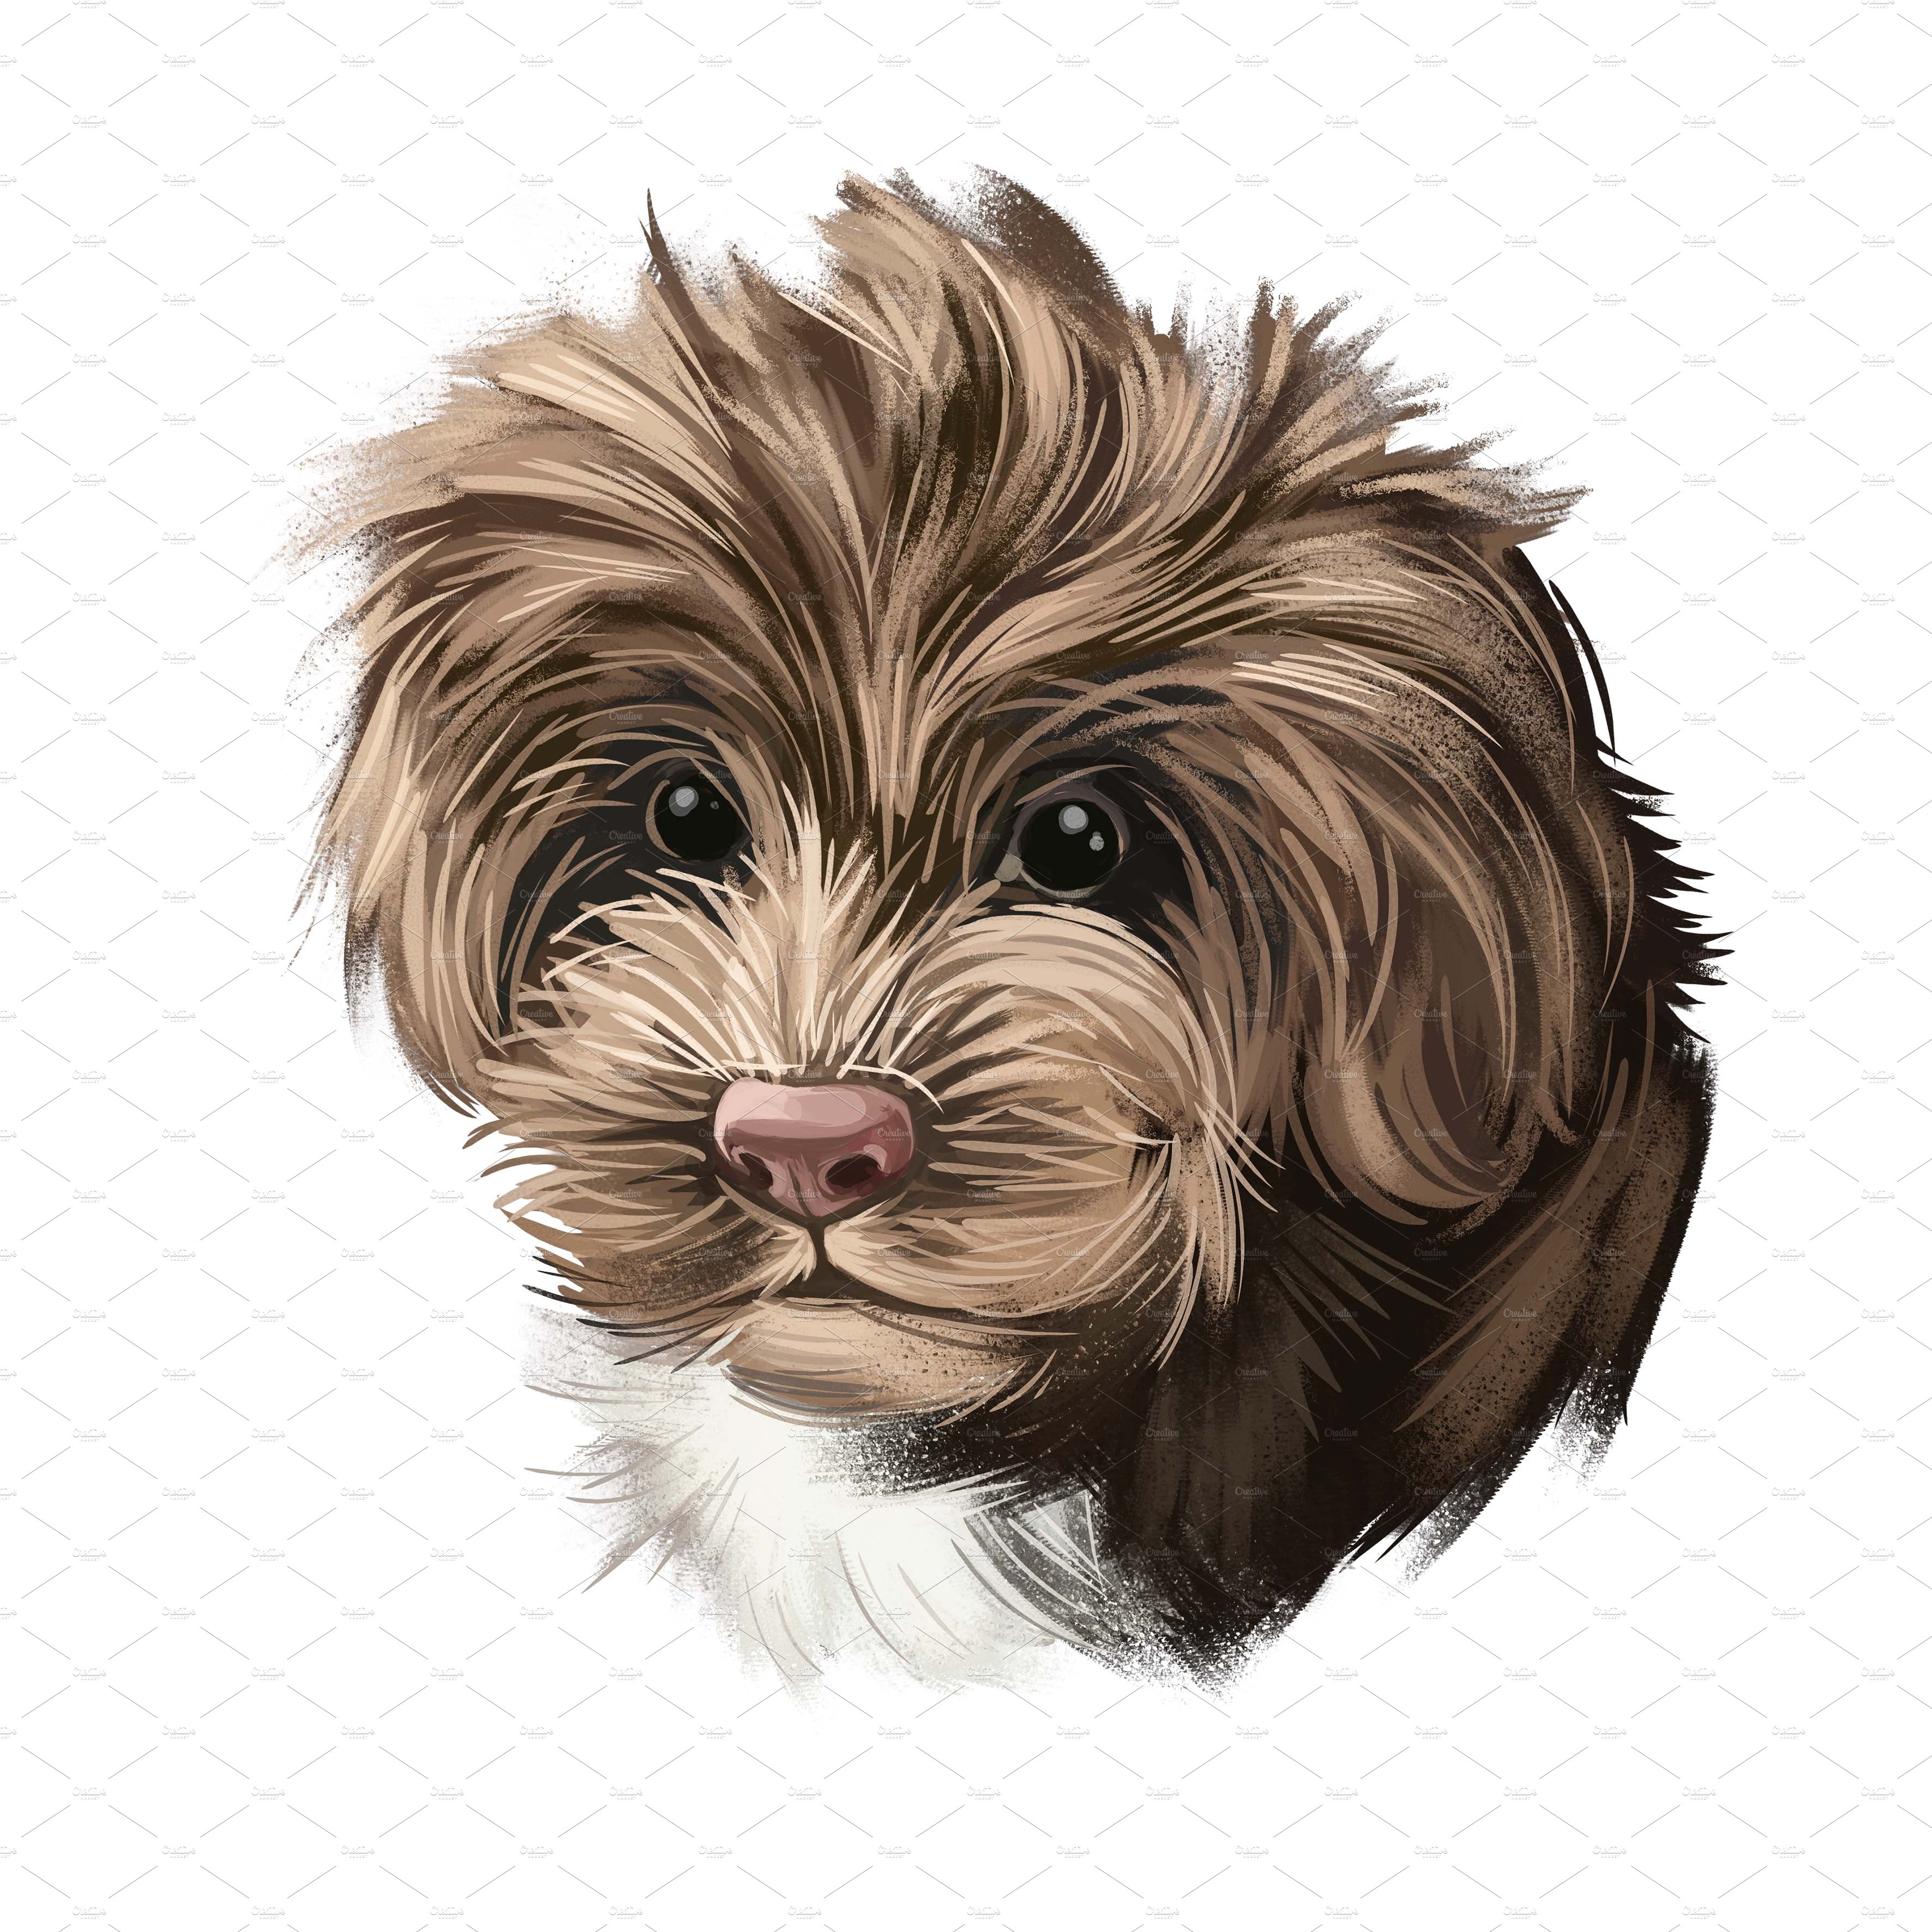 25. sproodle puppy png 28229 854